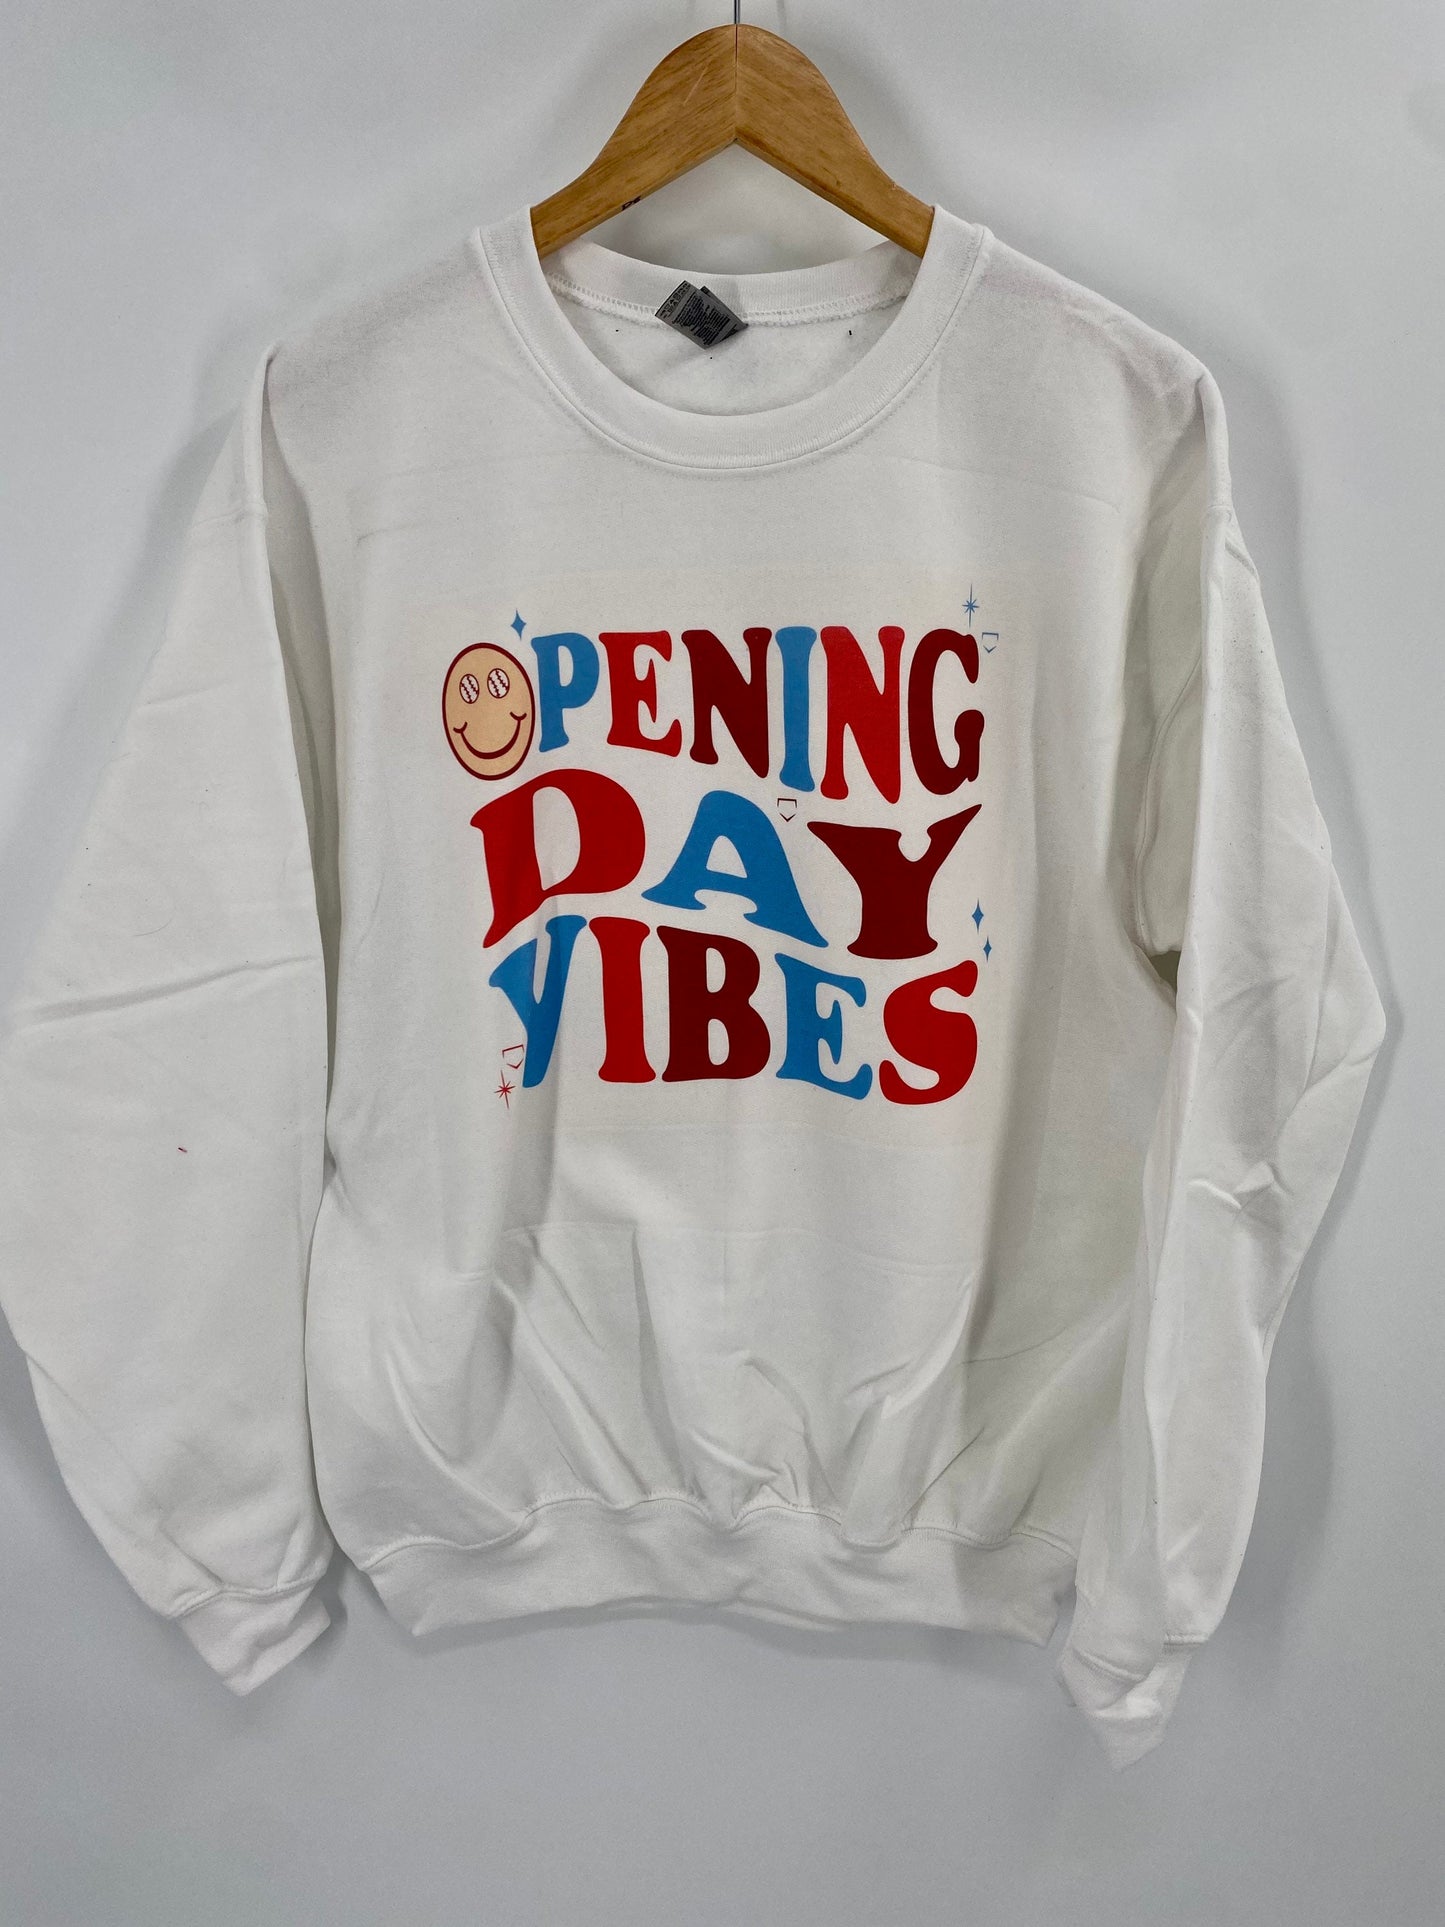 Opening Day Vibes Crewneck